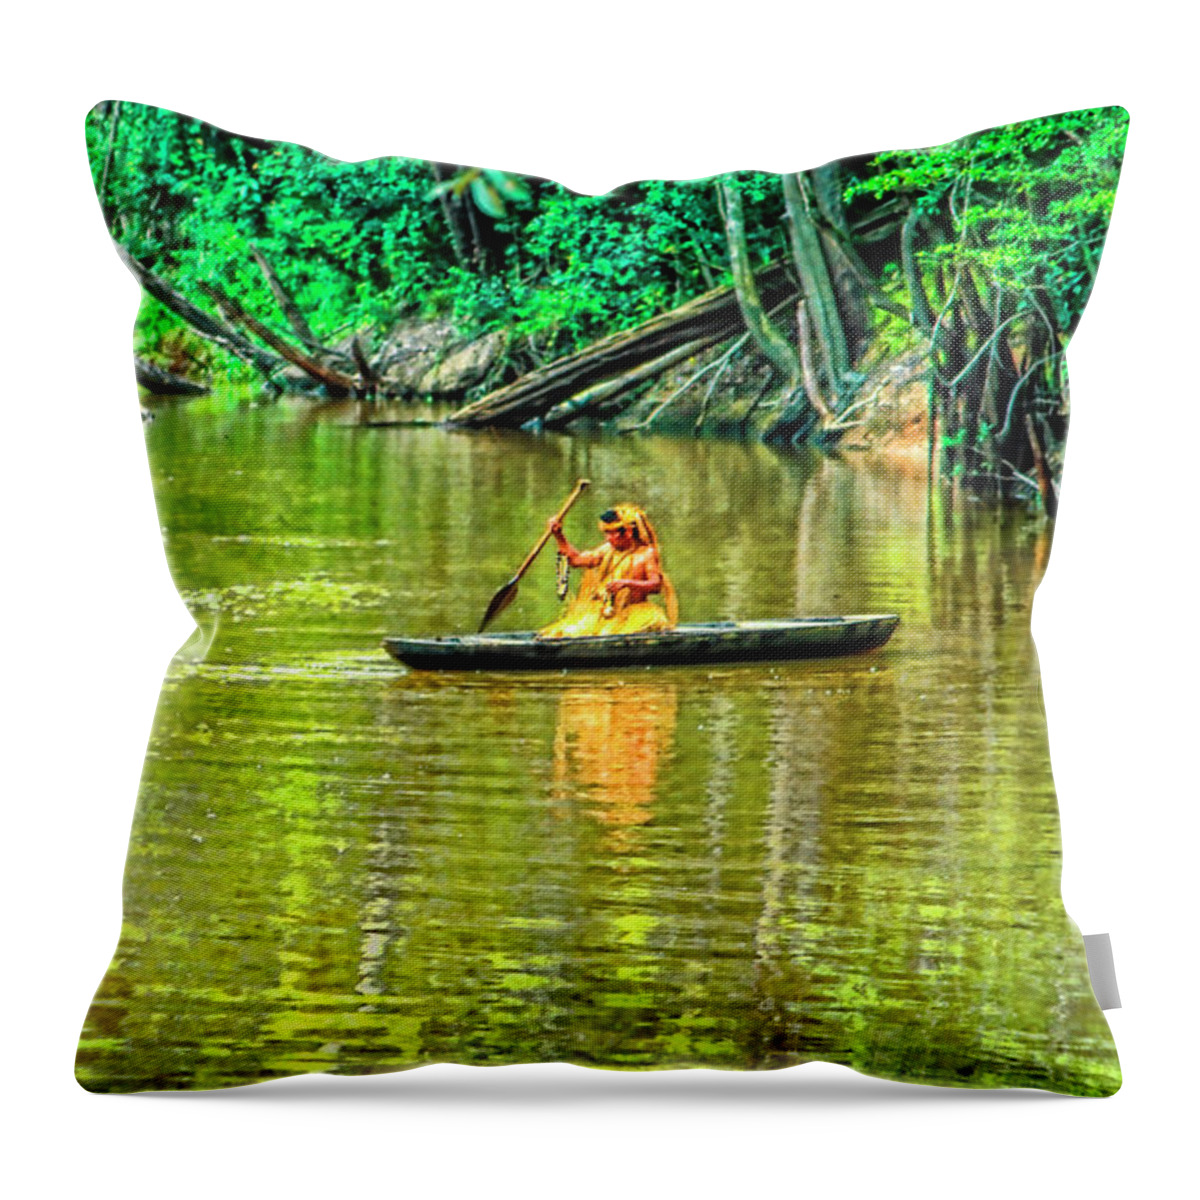 Peru Throw Pillow featuring the photograph Alone by Rick Bragan